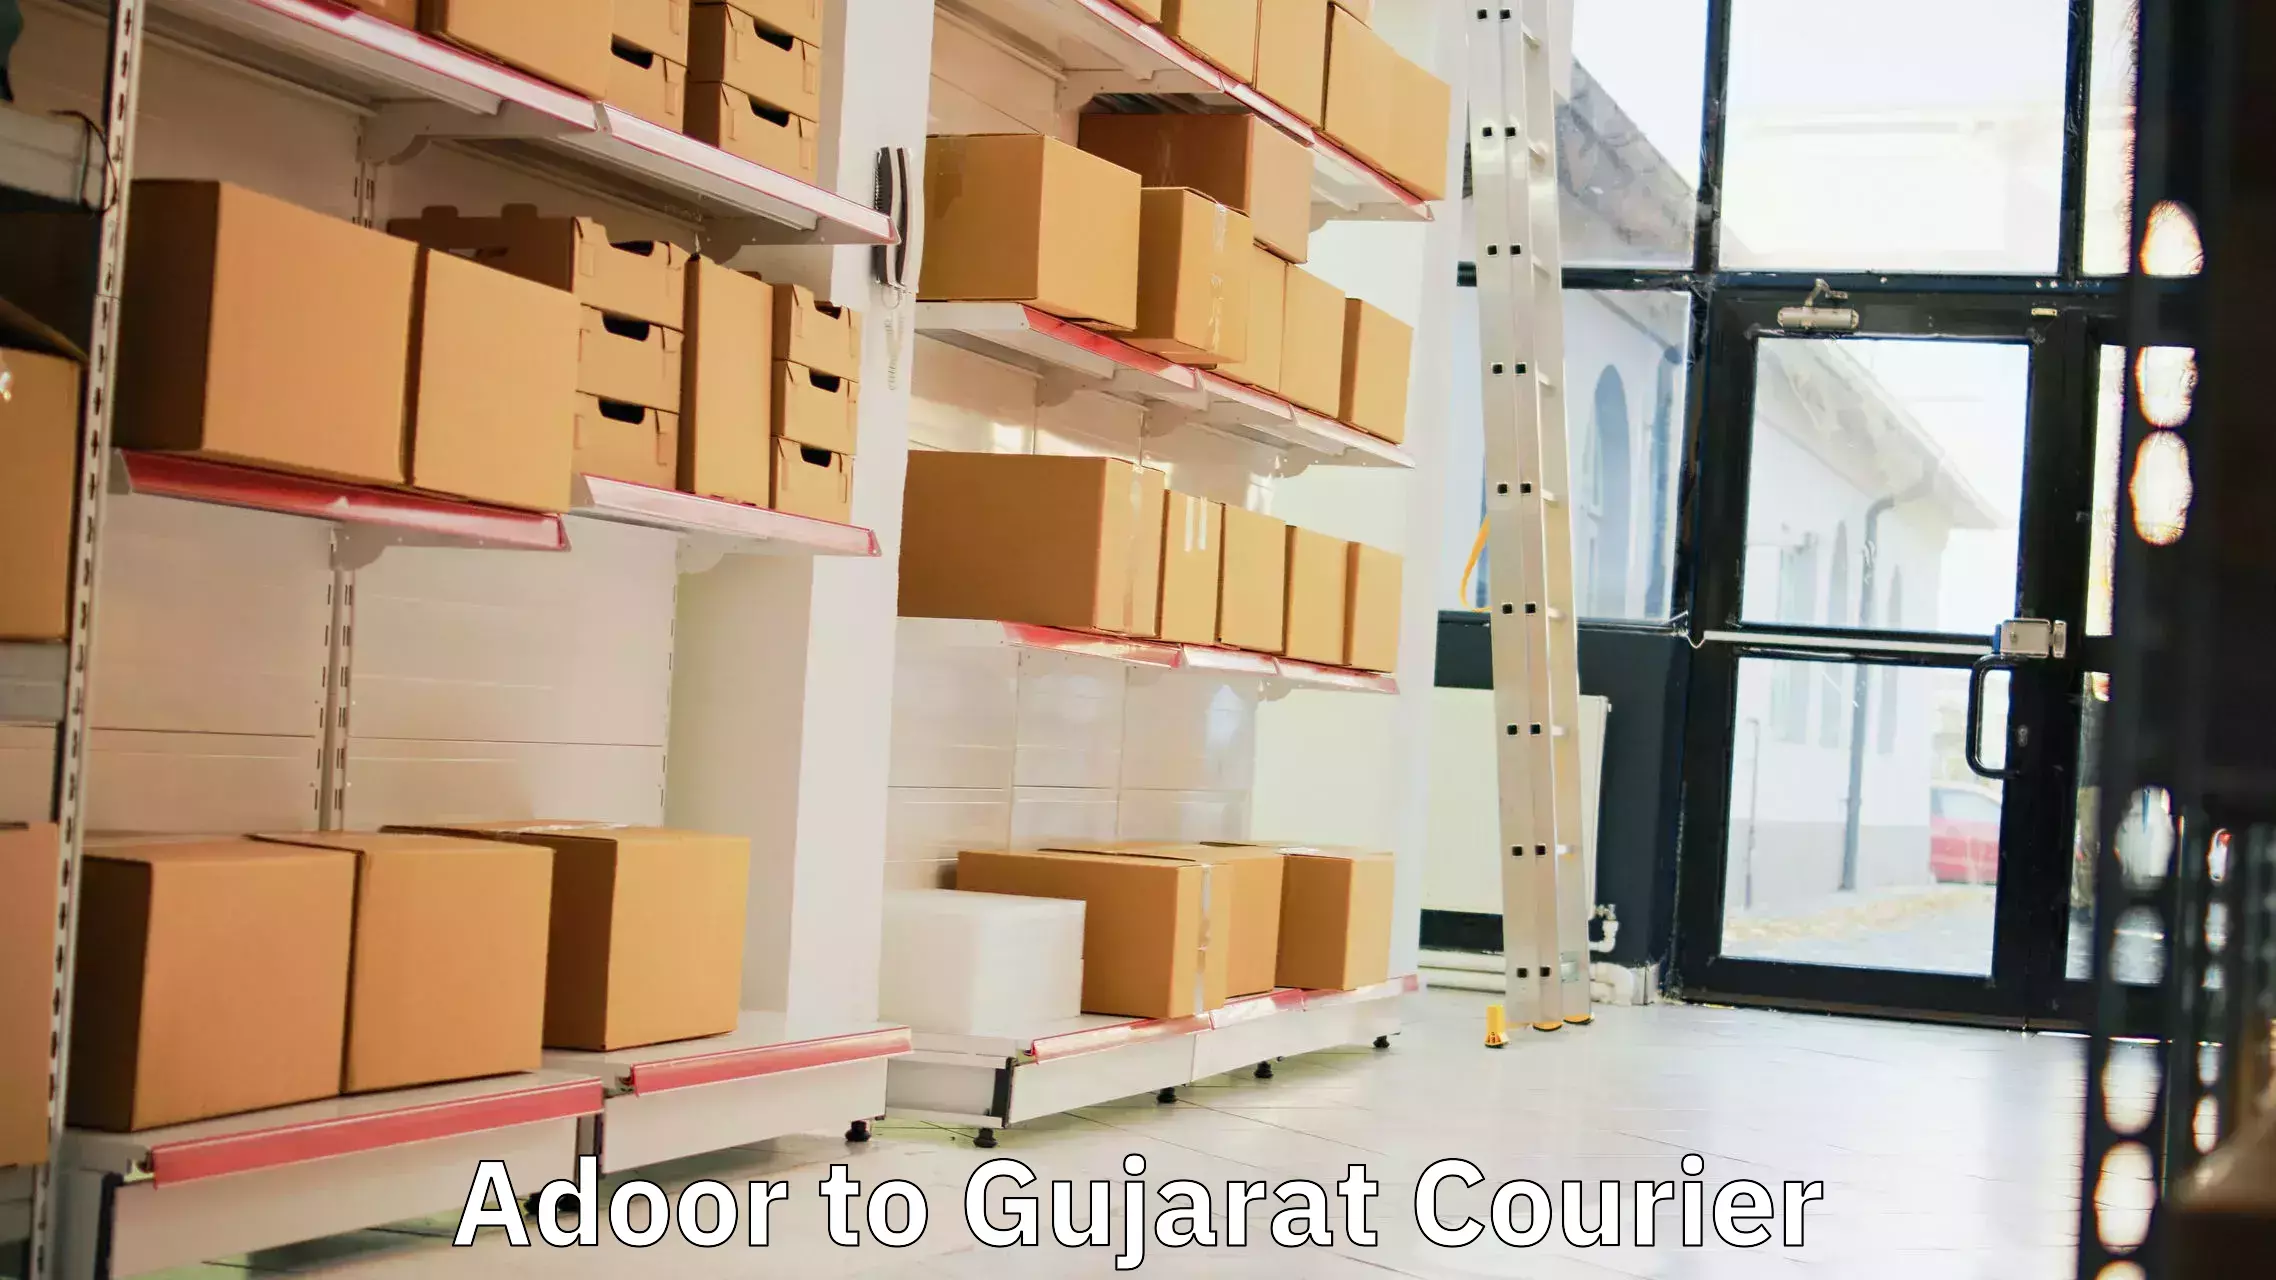 Same-day delivery solutions Adoor to Gujarat